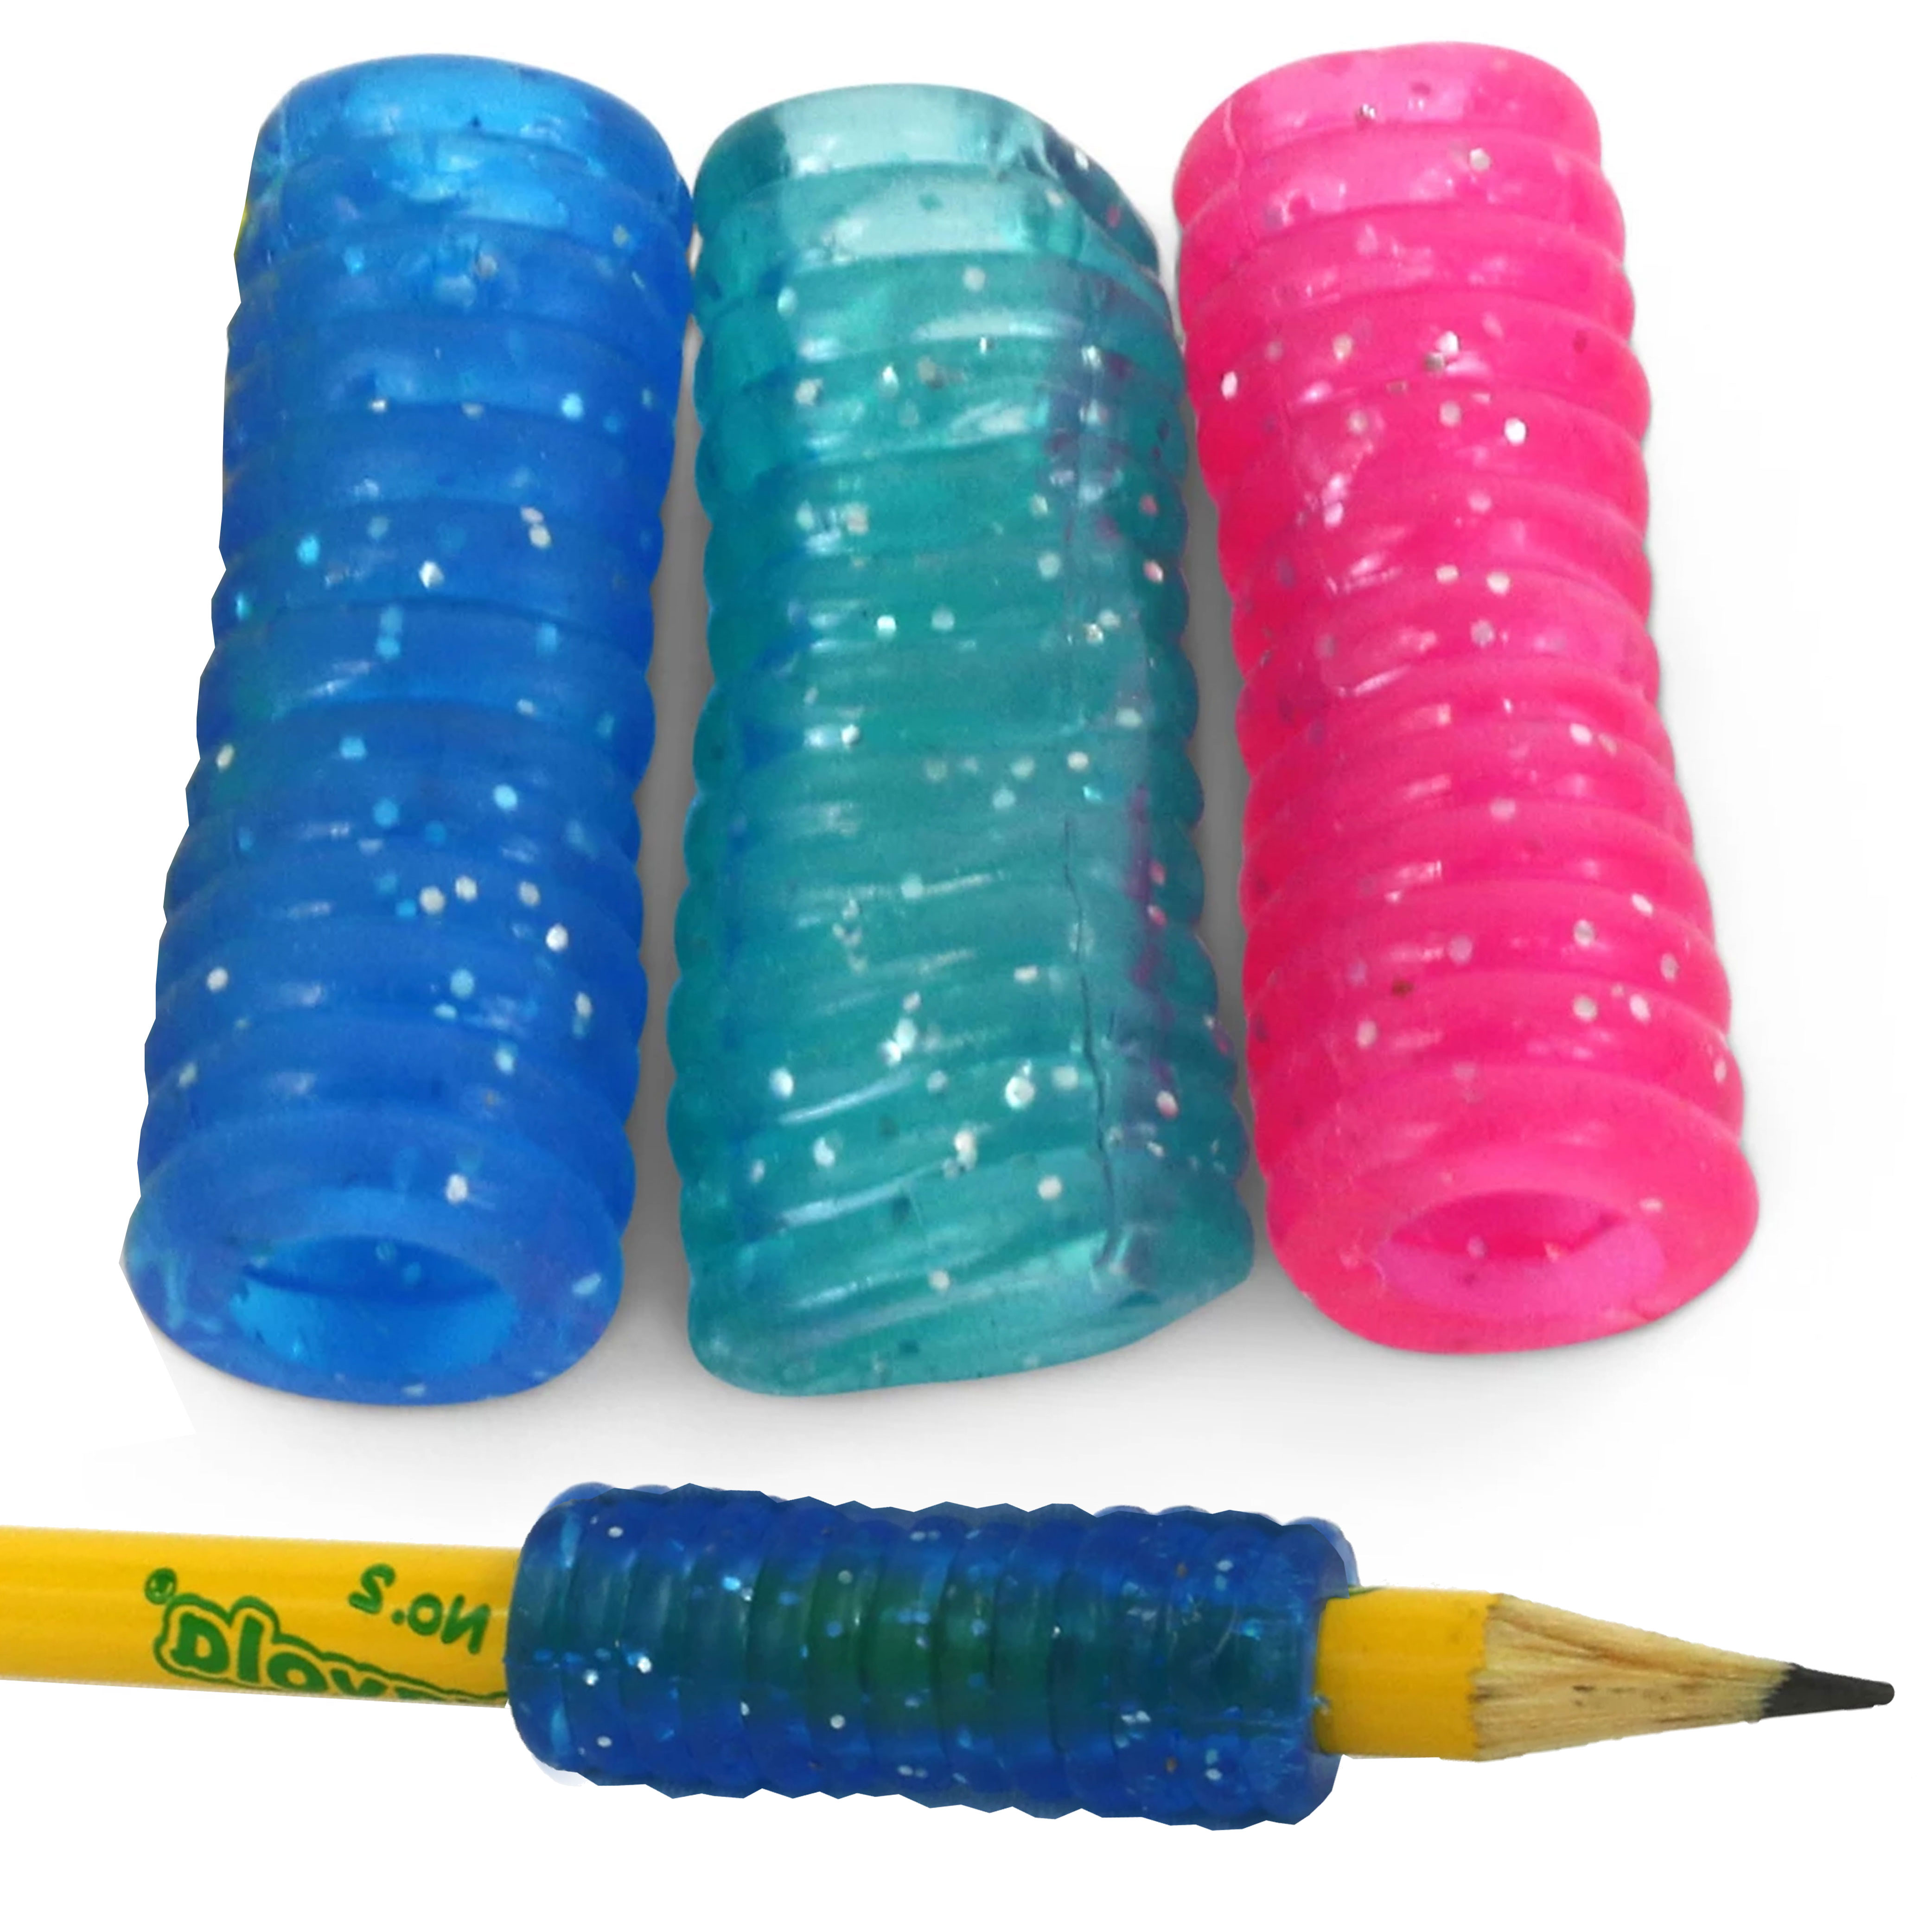 Cool Pencils for Kids - Toppers & Grips to Lead & Scented, Smiggle